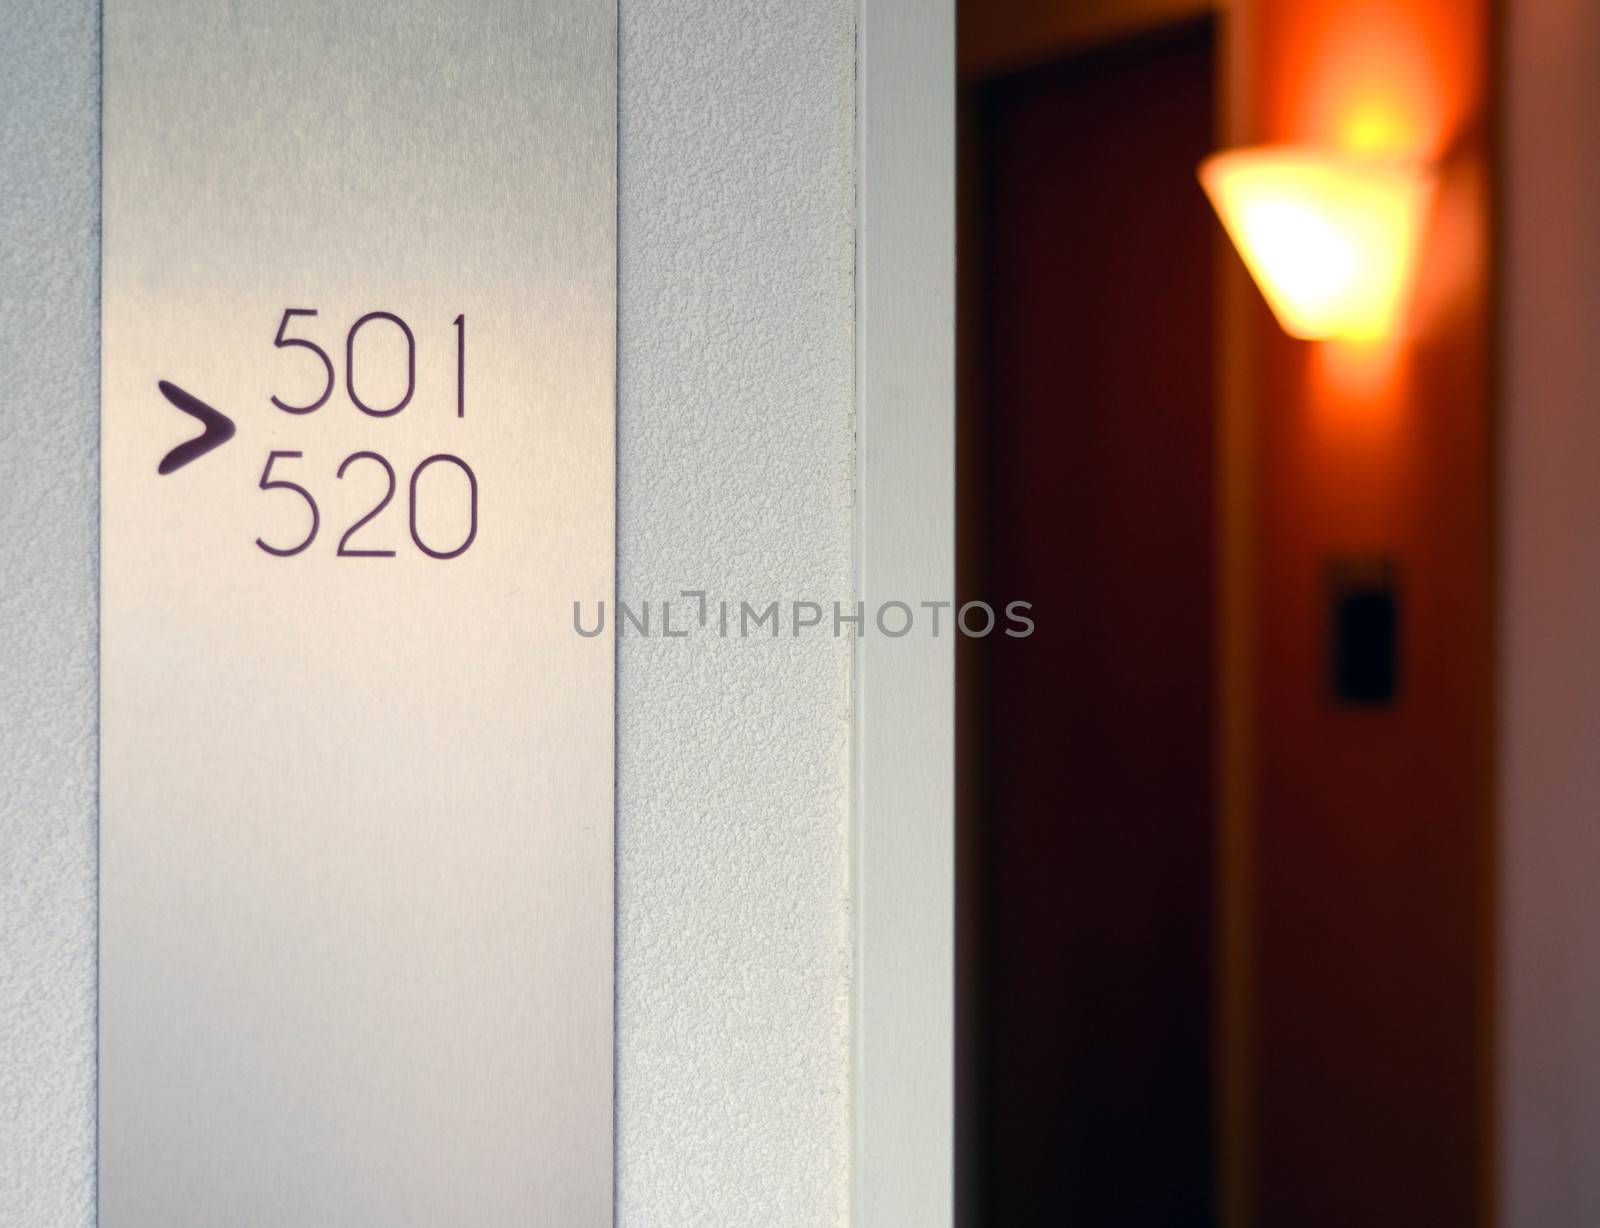 Travel Image Of A Hotel Corridor With Light And Sign